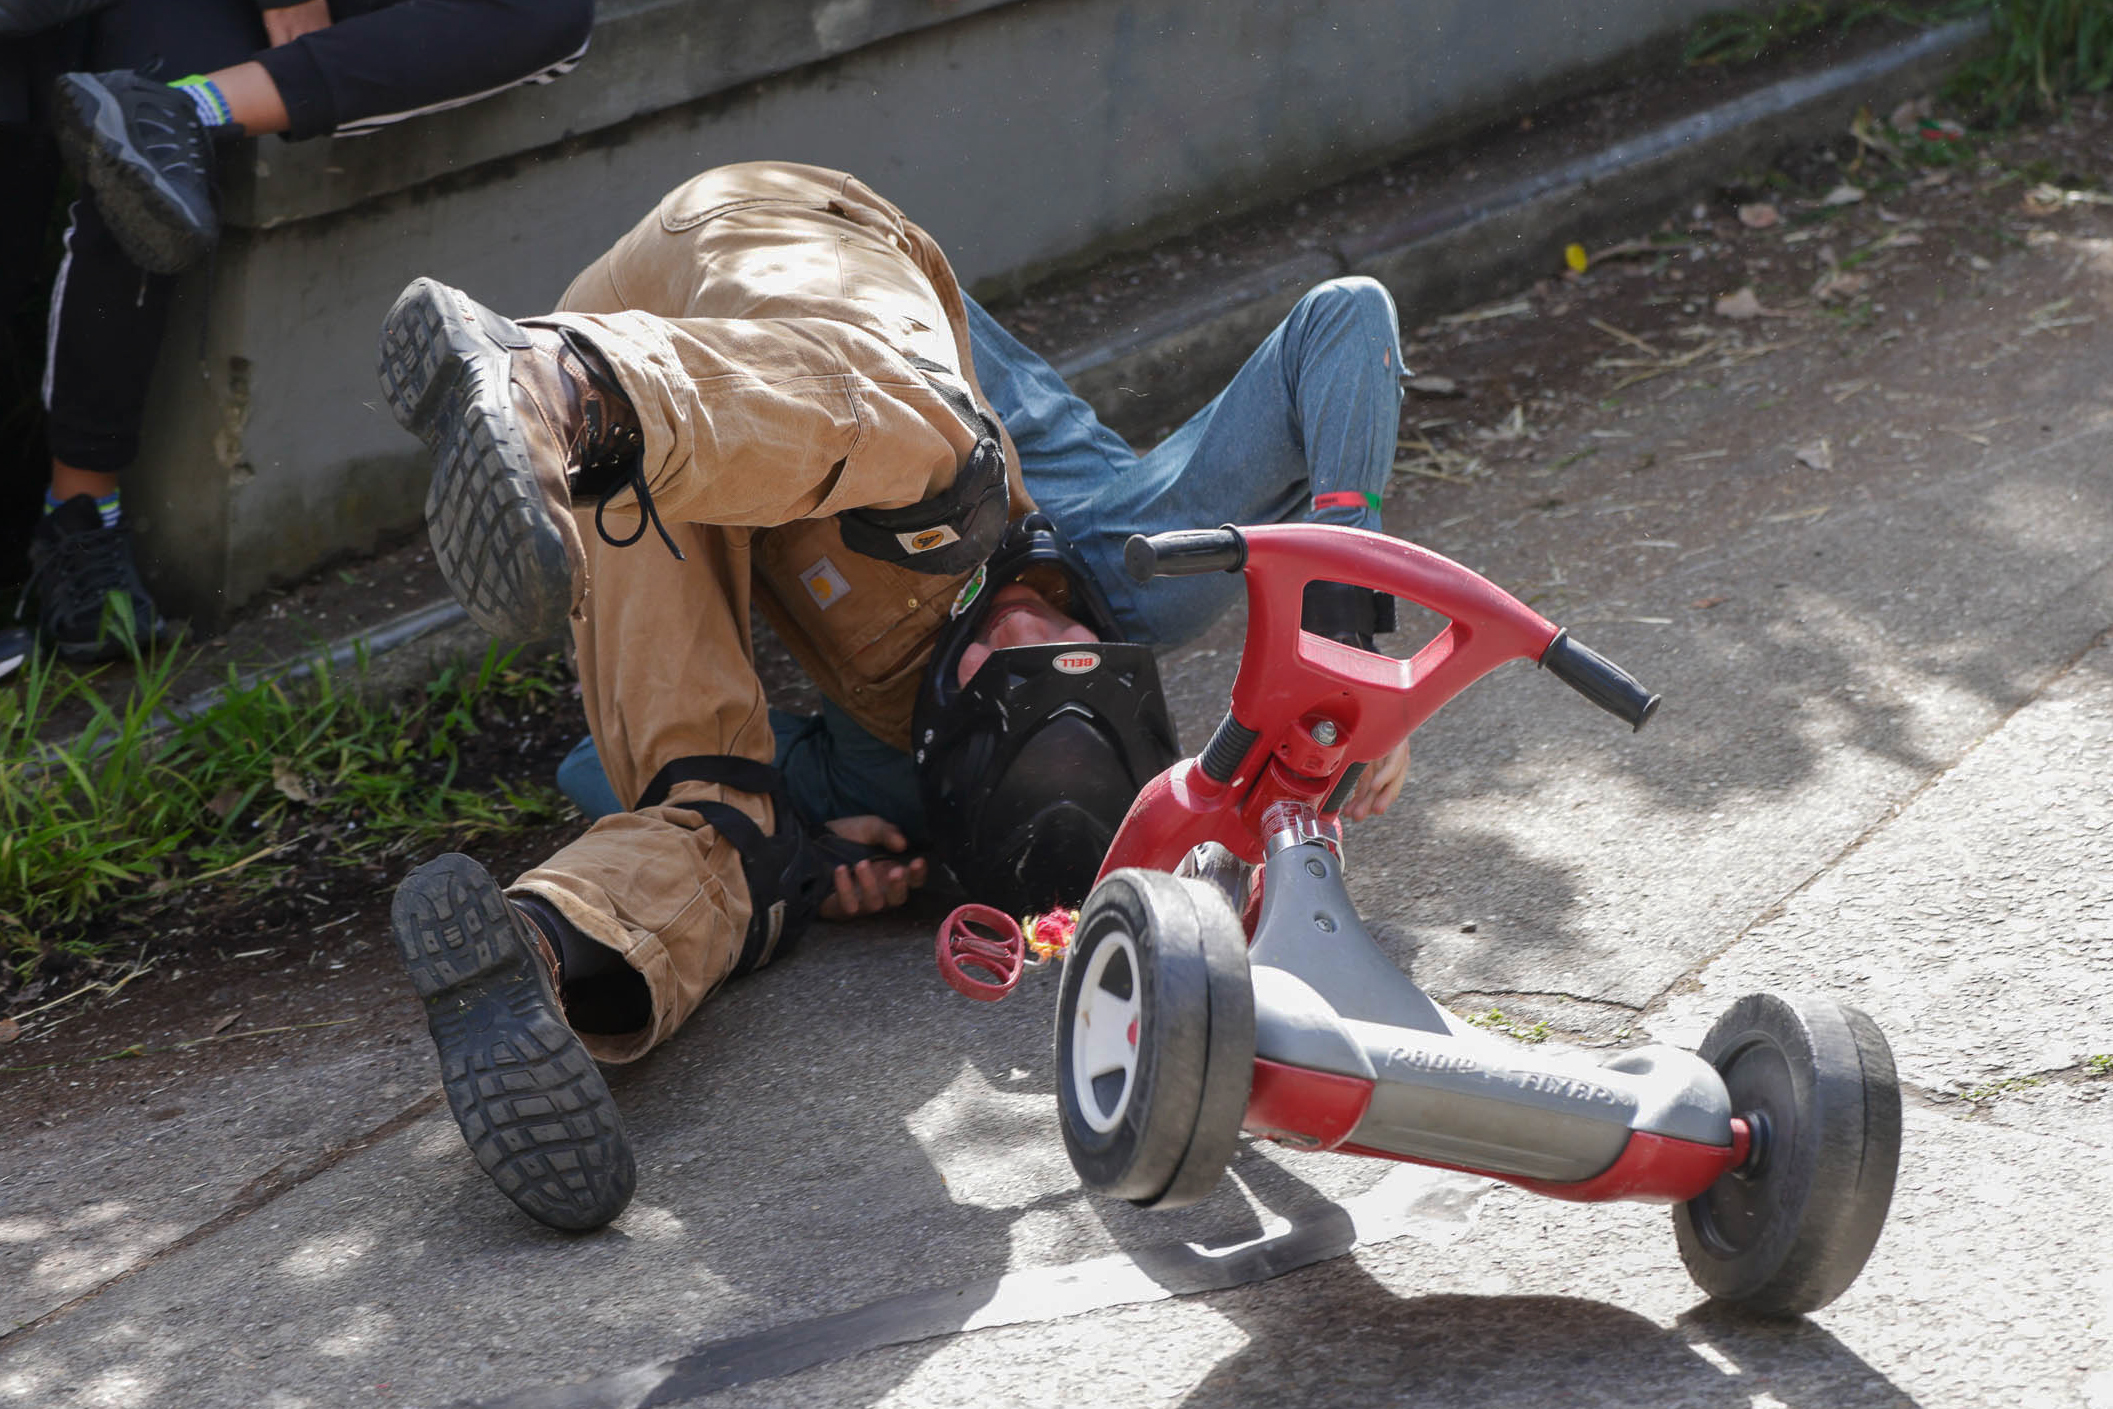 A person is on the ground next to an overturned tricycle, appearing to have fallen.